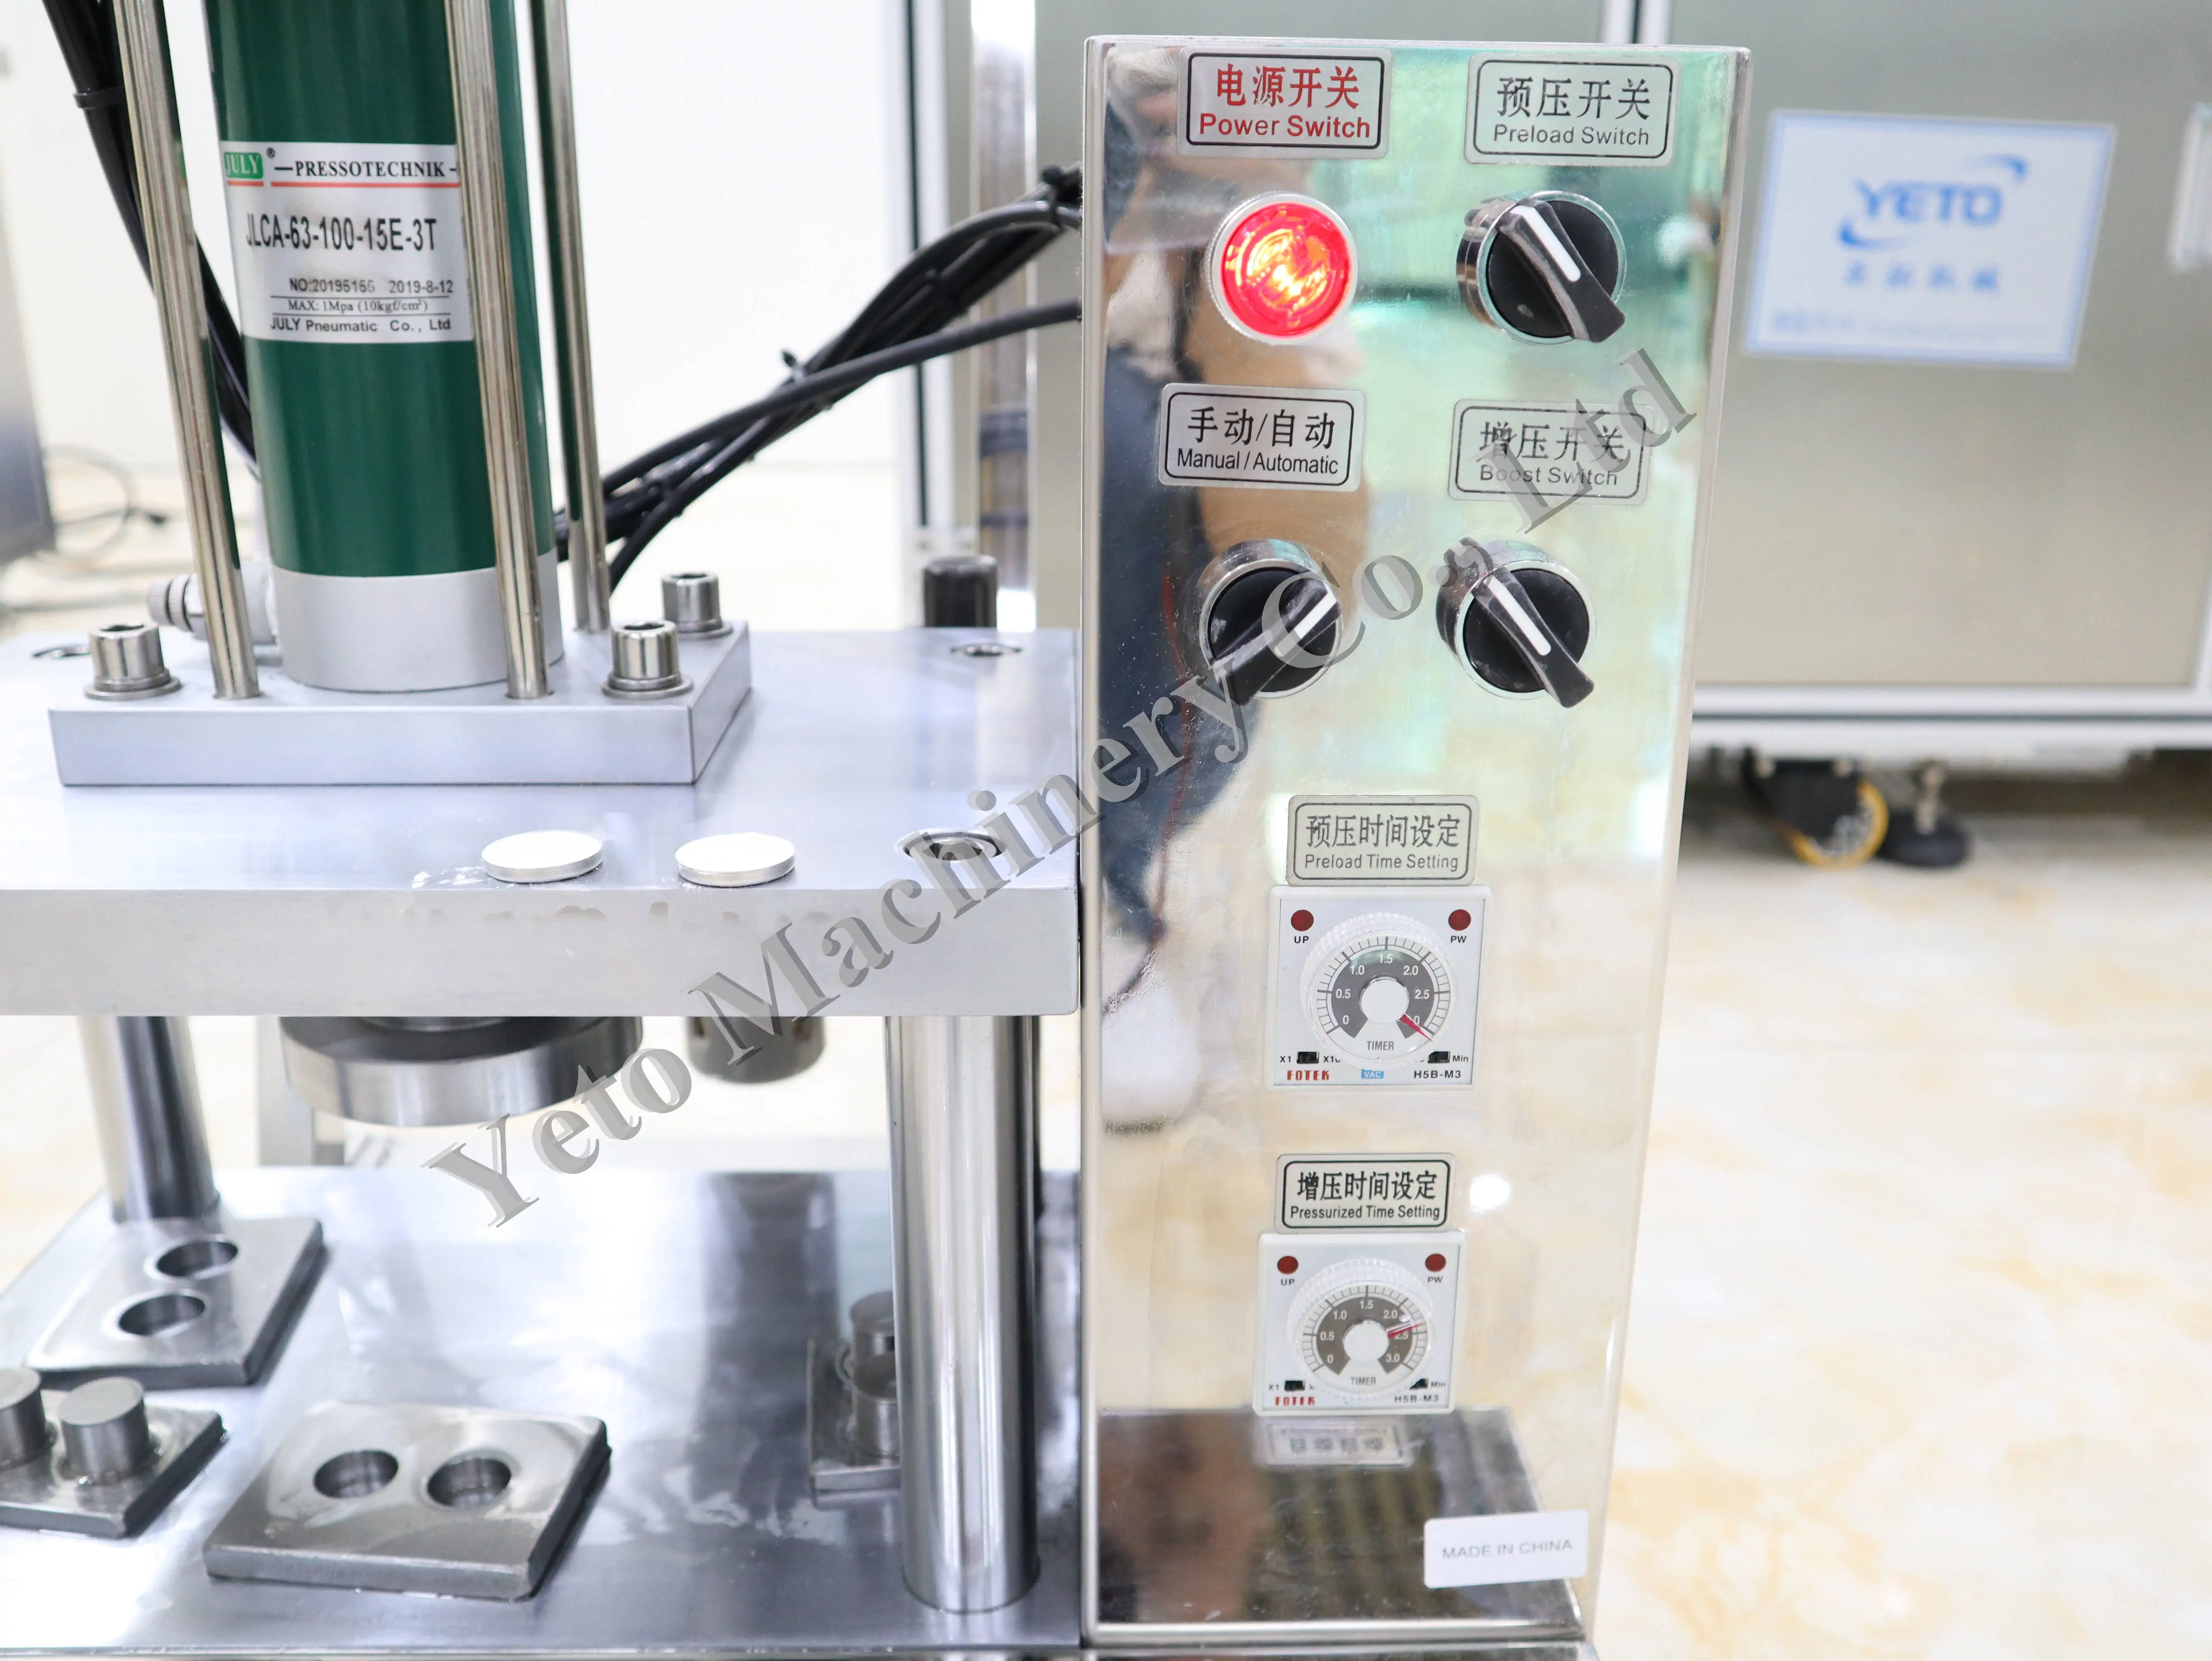 
Yeto Automatic Lab Powder Cosmetic Compact Eye Shadow Blush Pigment Palette Tablet Small Pneumatic Hydraulic Pressing Machinery 